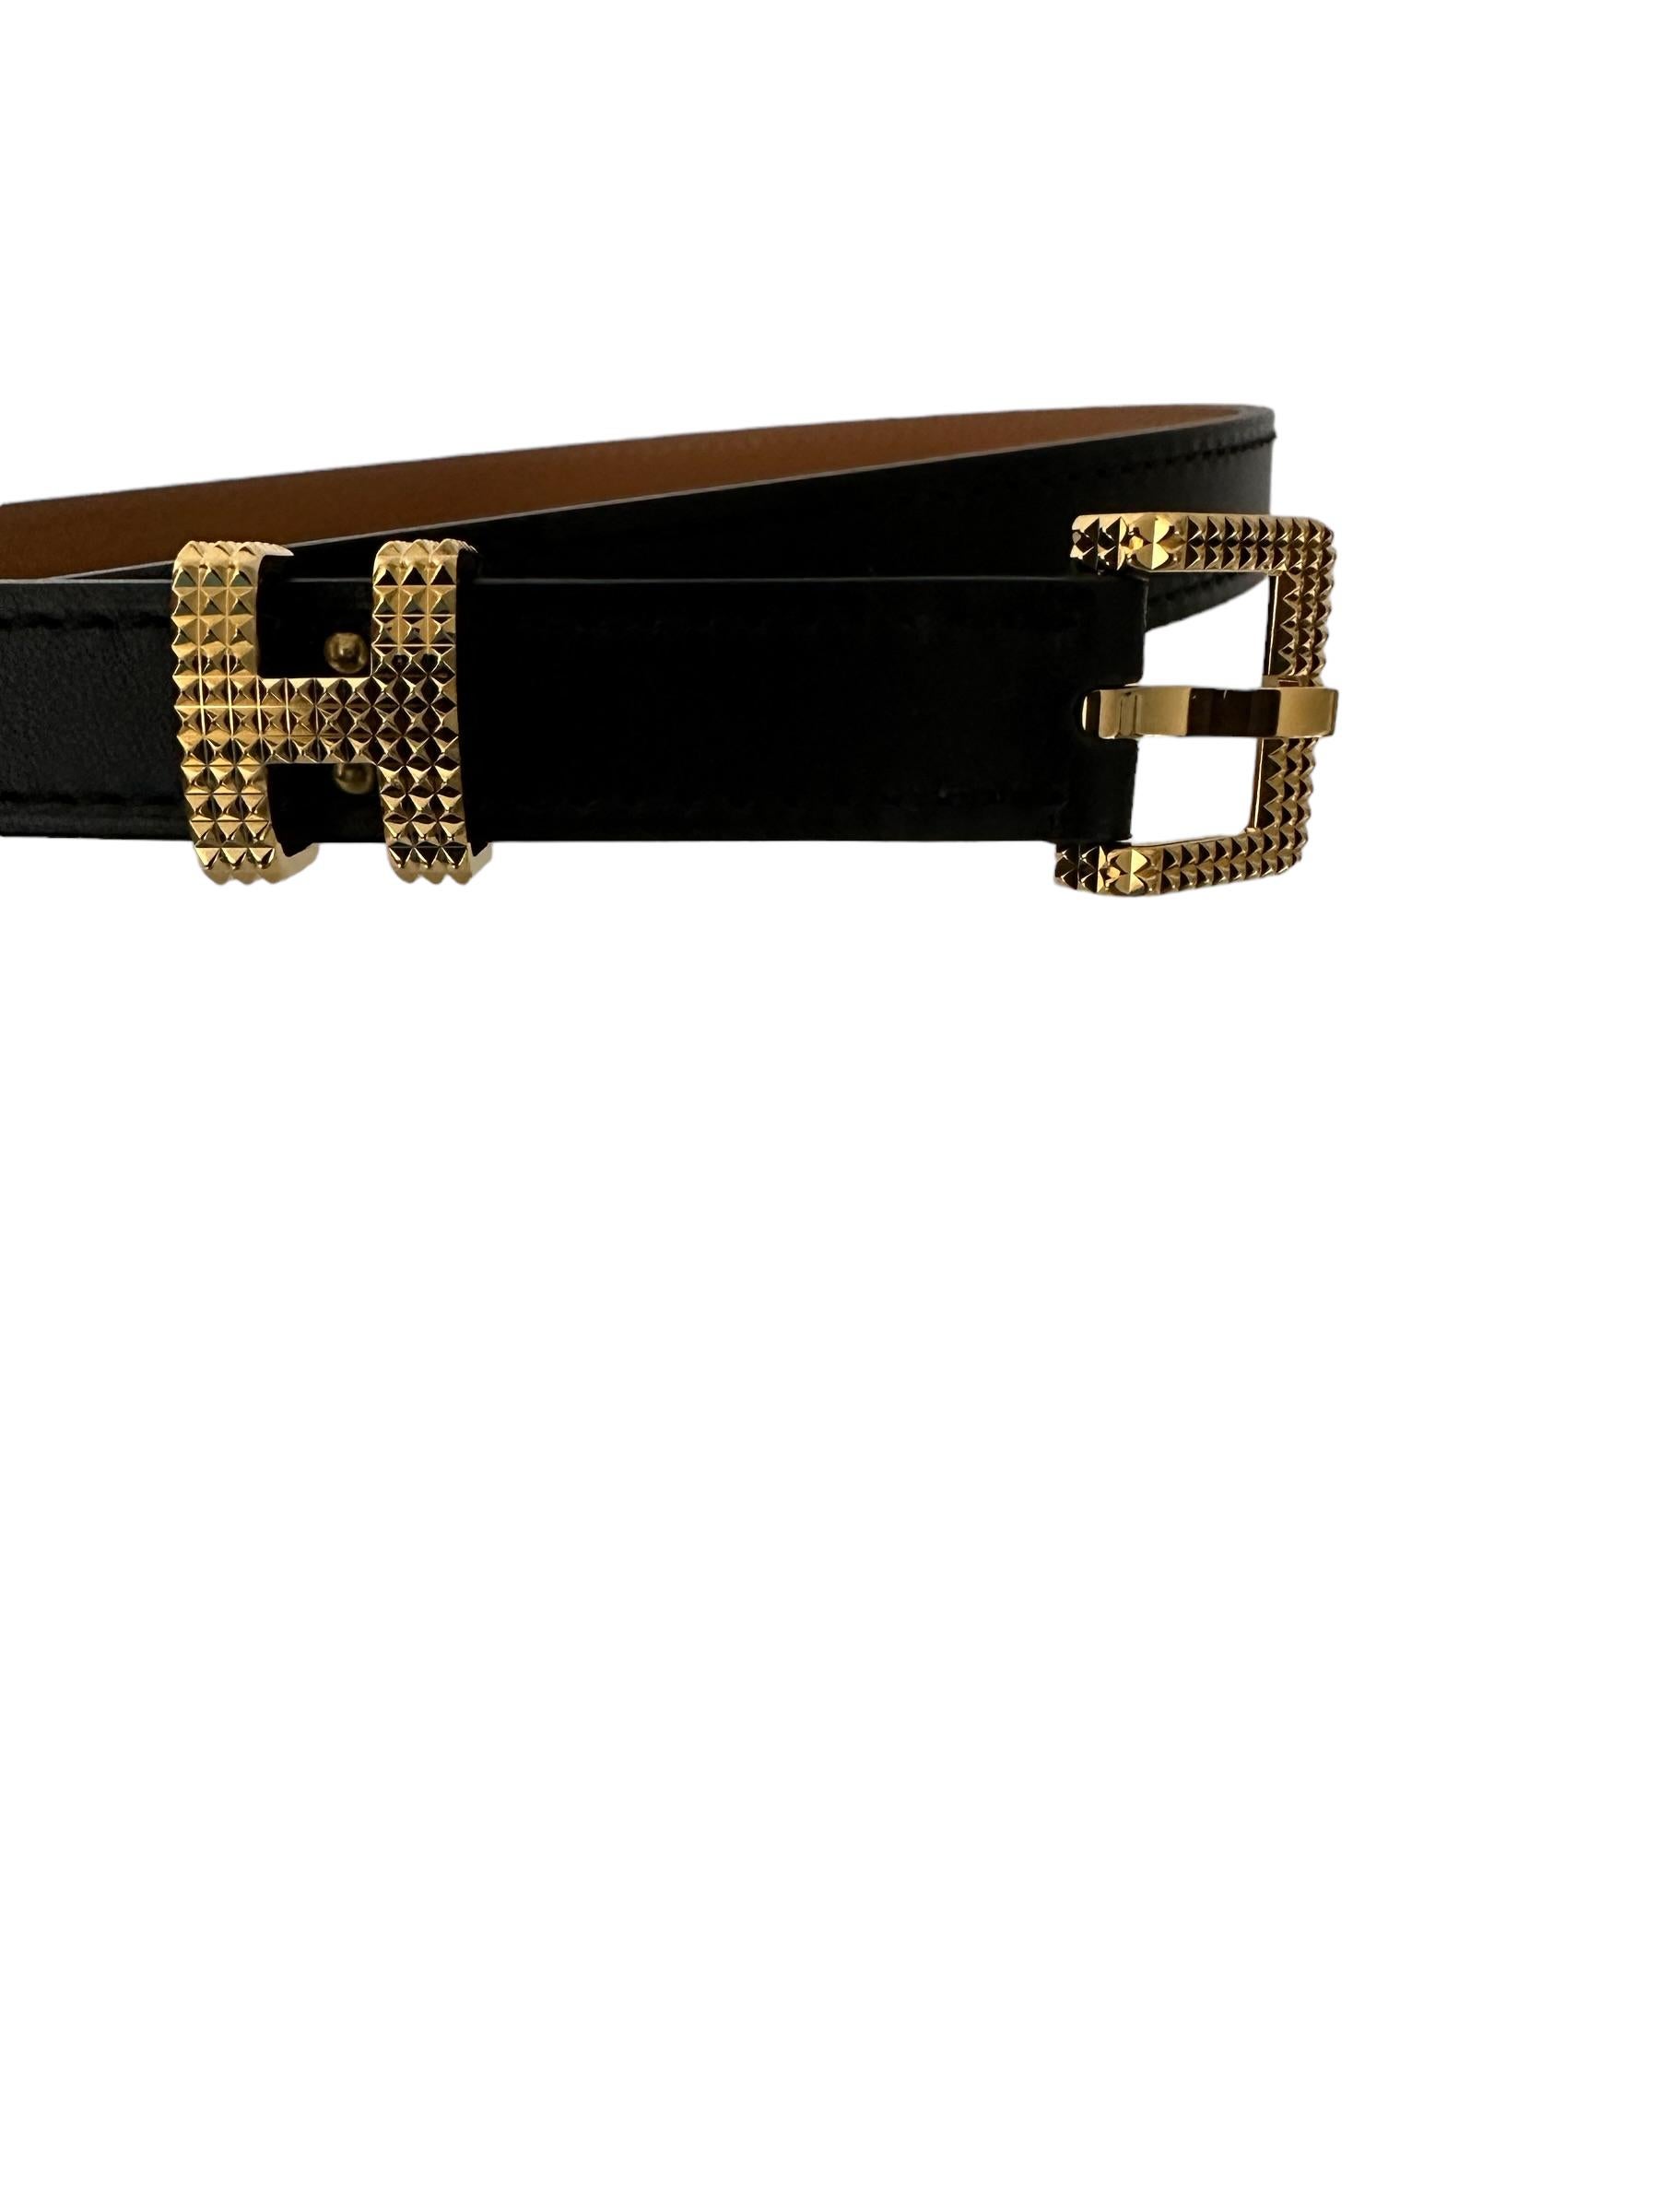 Hermes Belt Pop H Guillochee 15 Belt Black Gold Hardware In New Condition For Sale In West Chester, PA